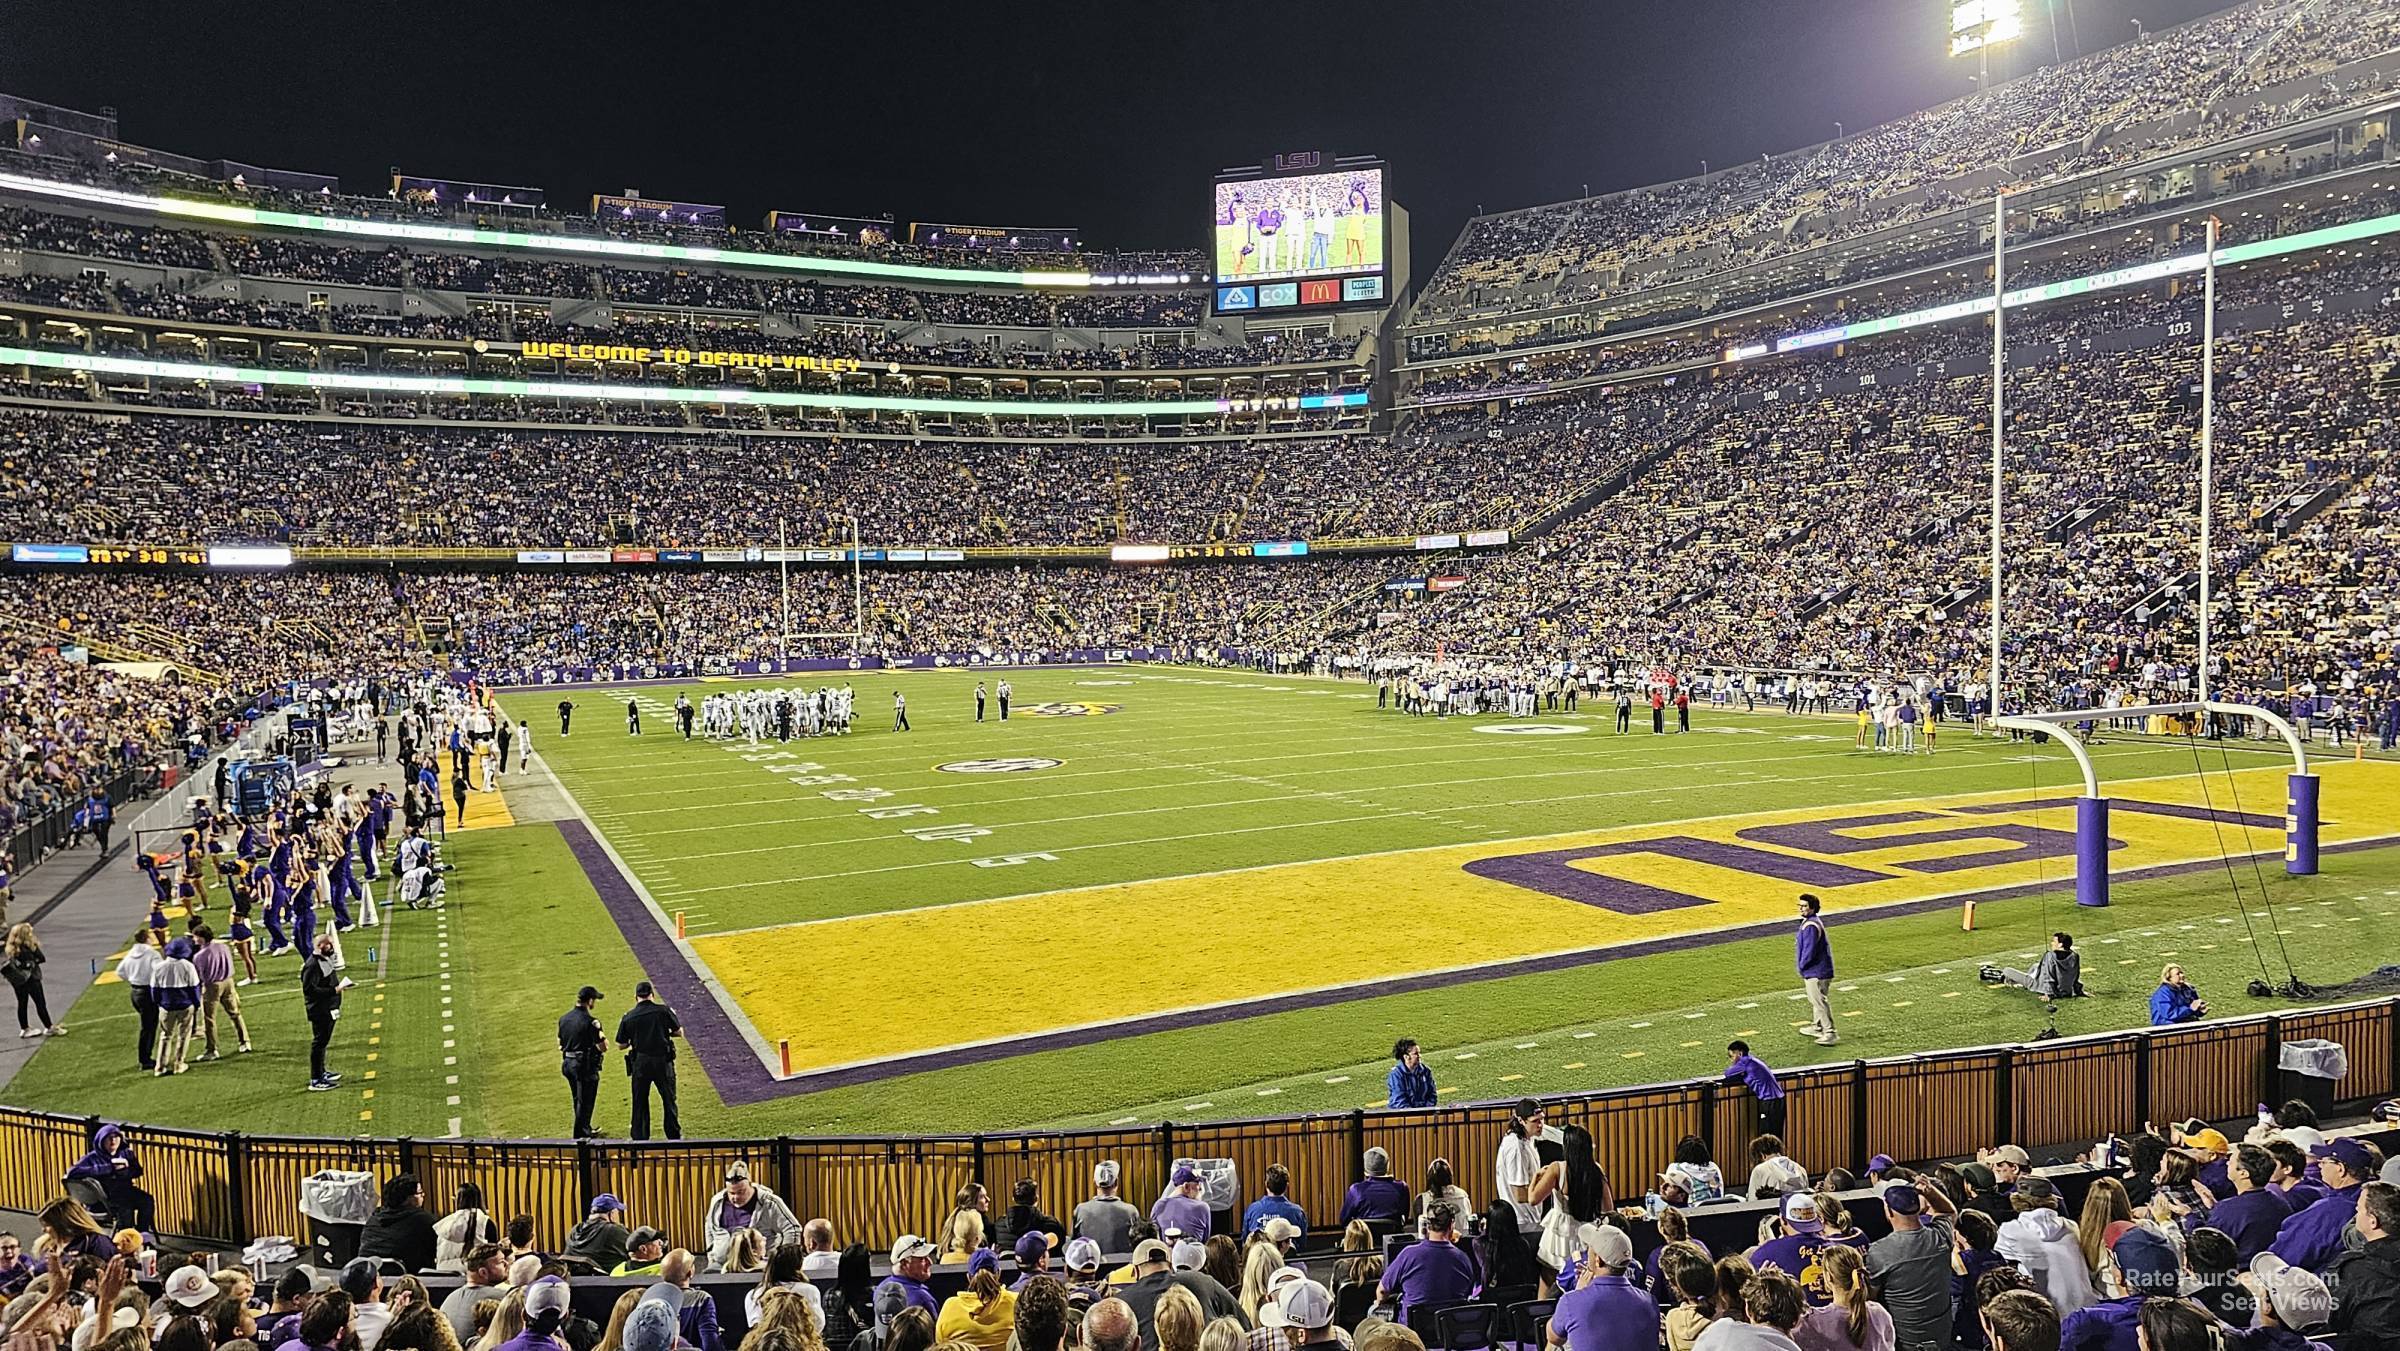 section 214, row 1 seat view  - tiger stadium